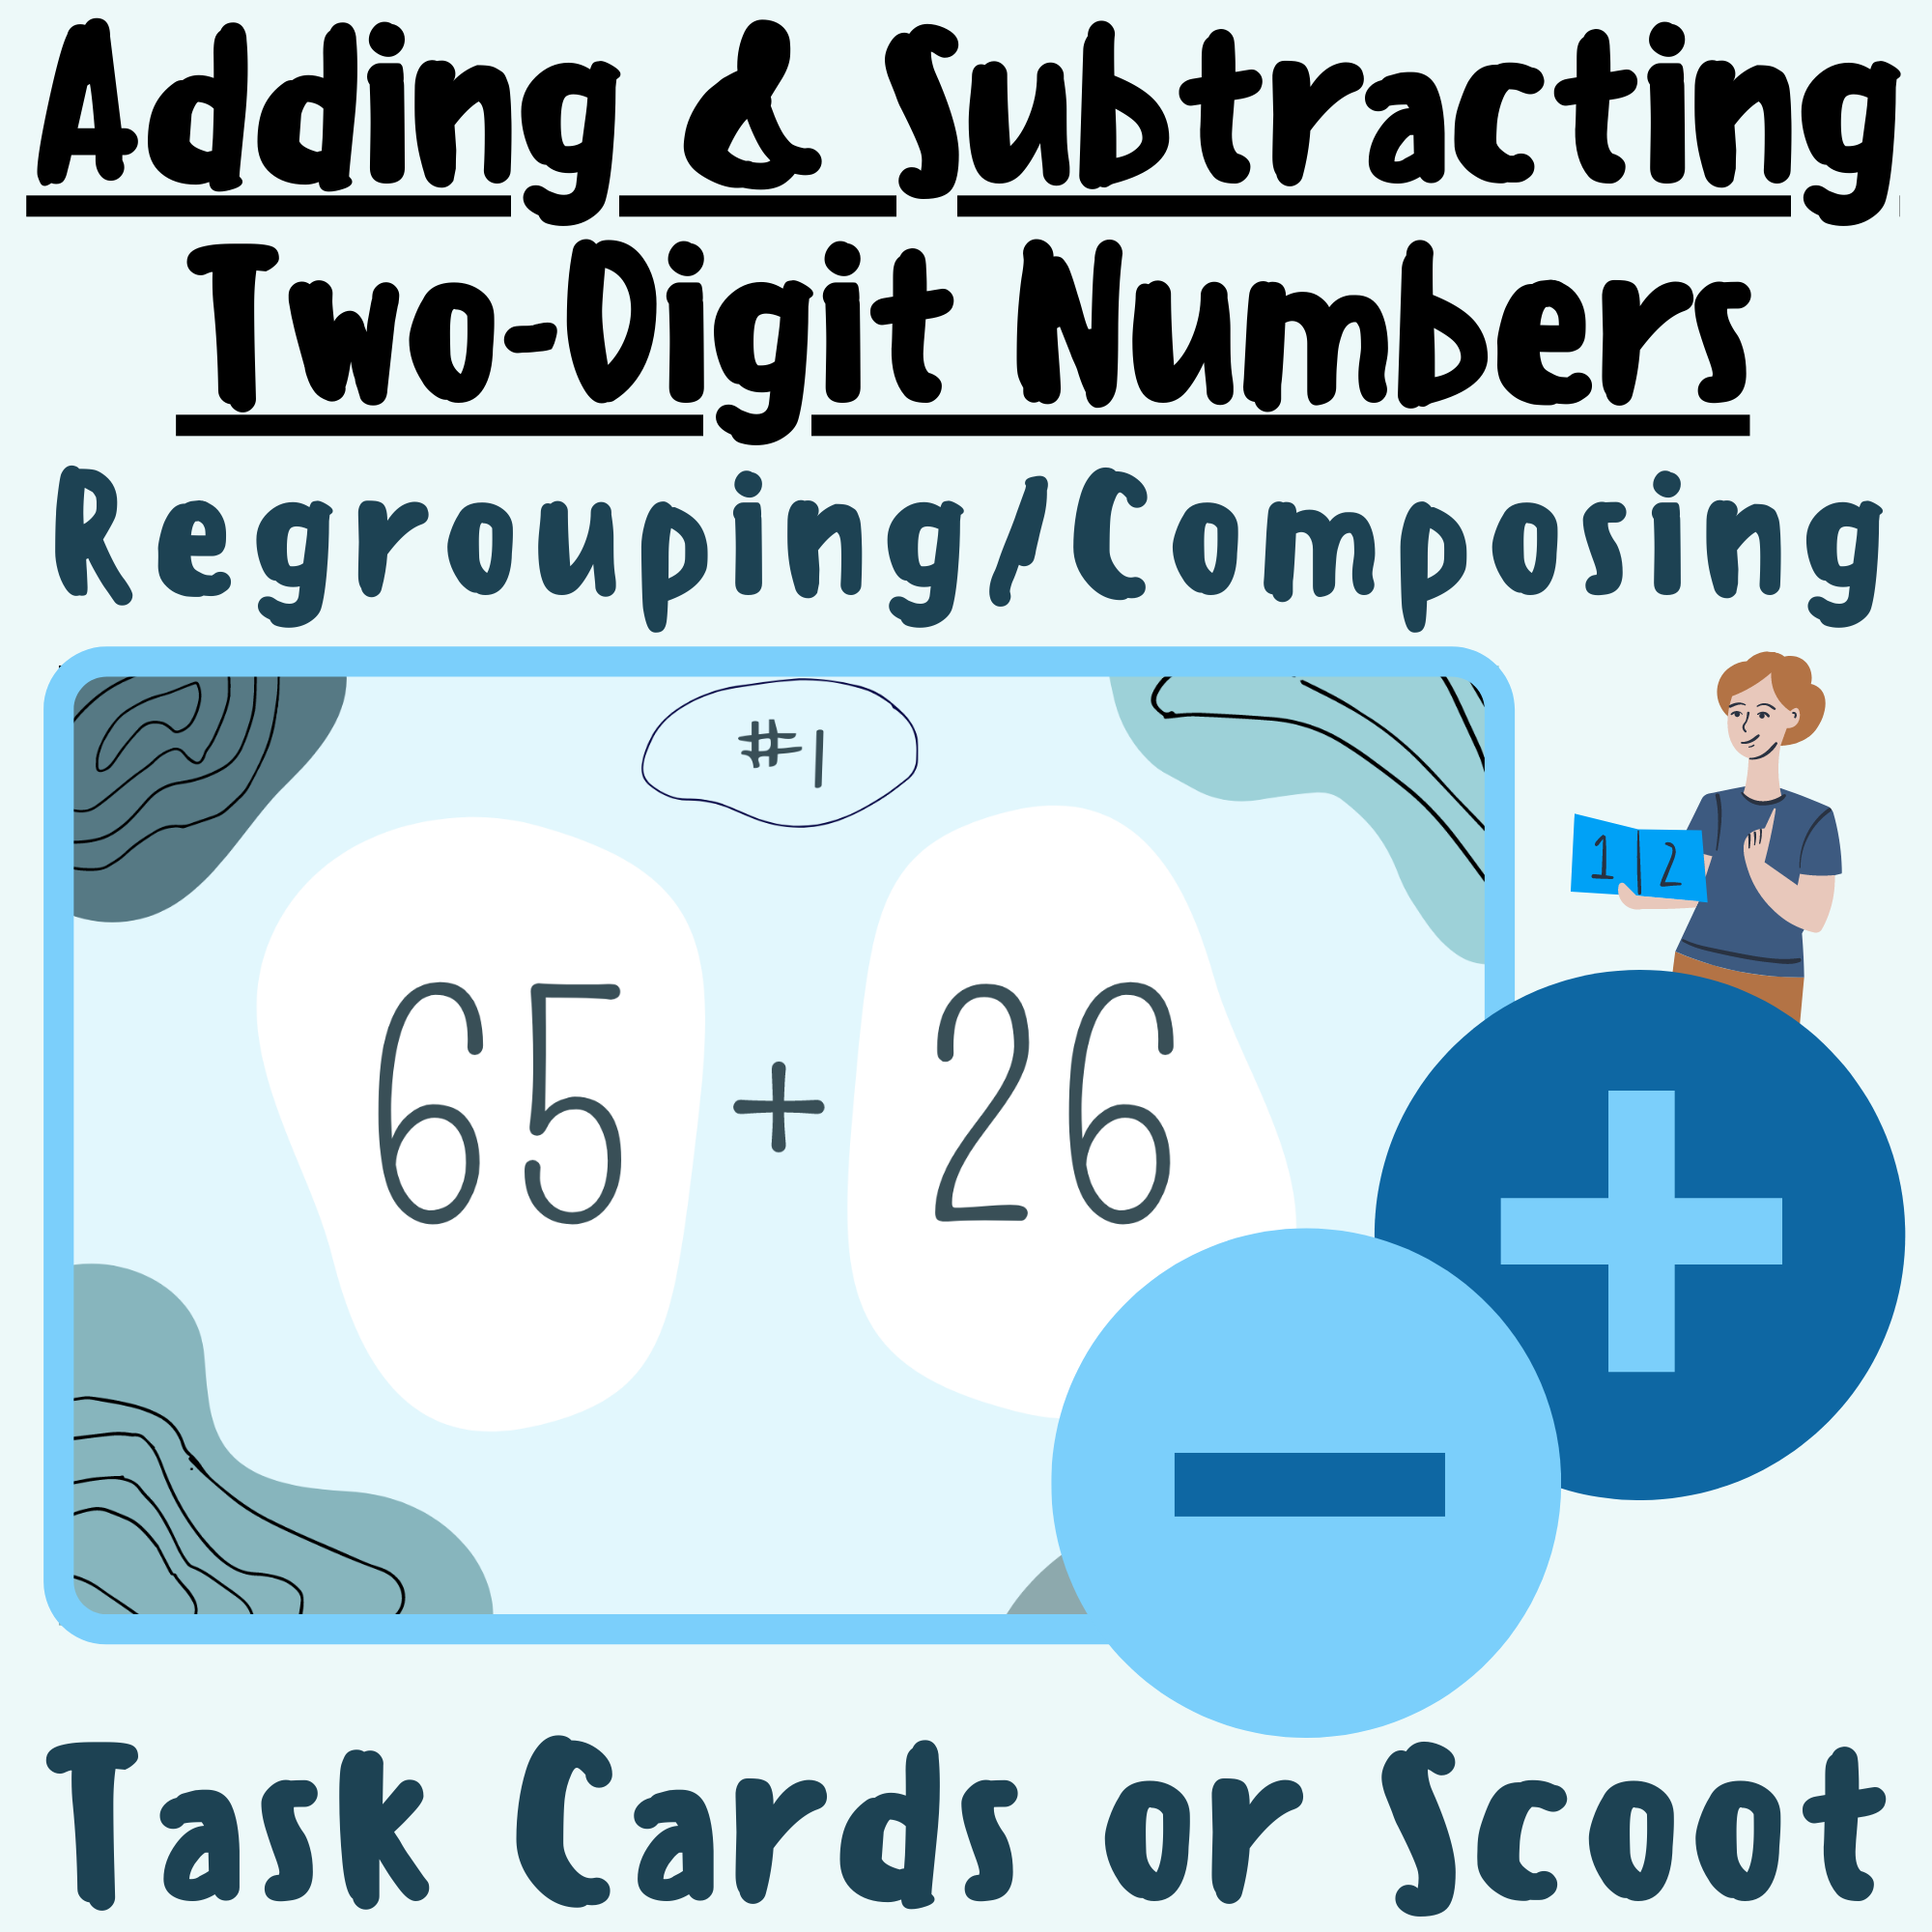 Adding and Subtracting Two-Digit Numbers With Regrouping and Composing TASK CARDS or SCOOT; For K-5 Teachers and Students in the Math Classroom